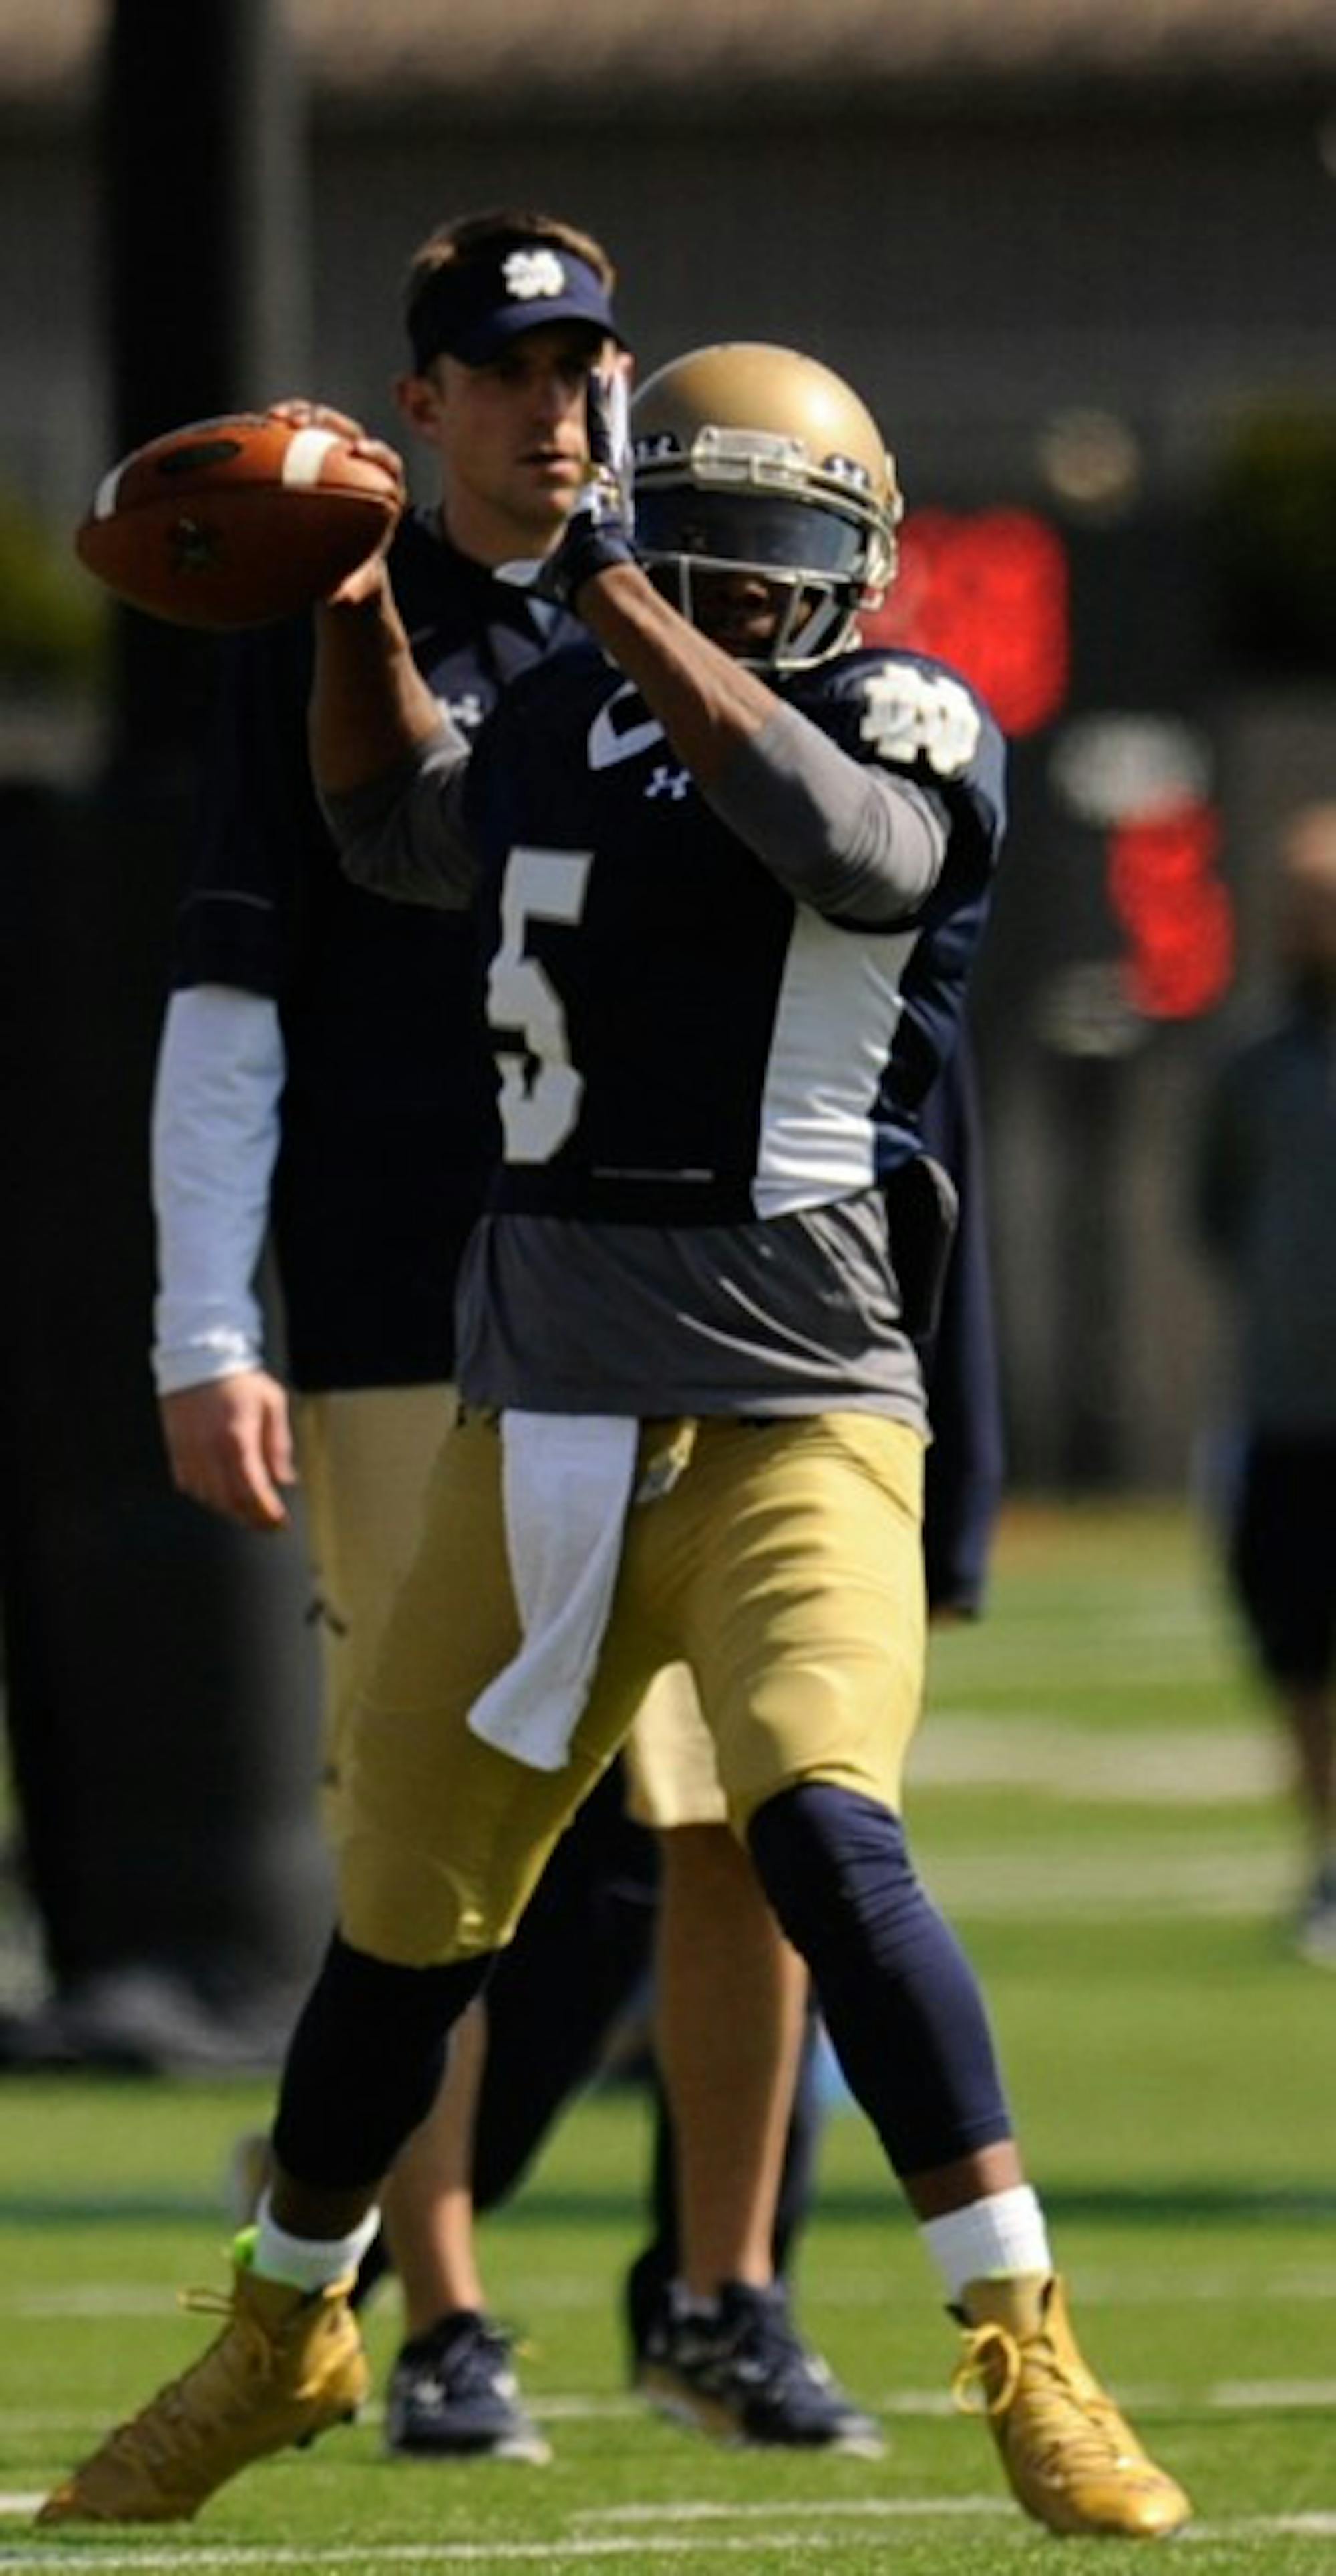 Graduate student quarterback Everett Golson throws a pass during spring practice Saturday at LaBar Practice Complex. Golson is competing with junior Malik Zaire for the starting job.